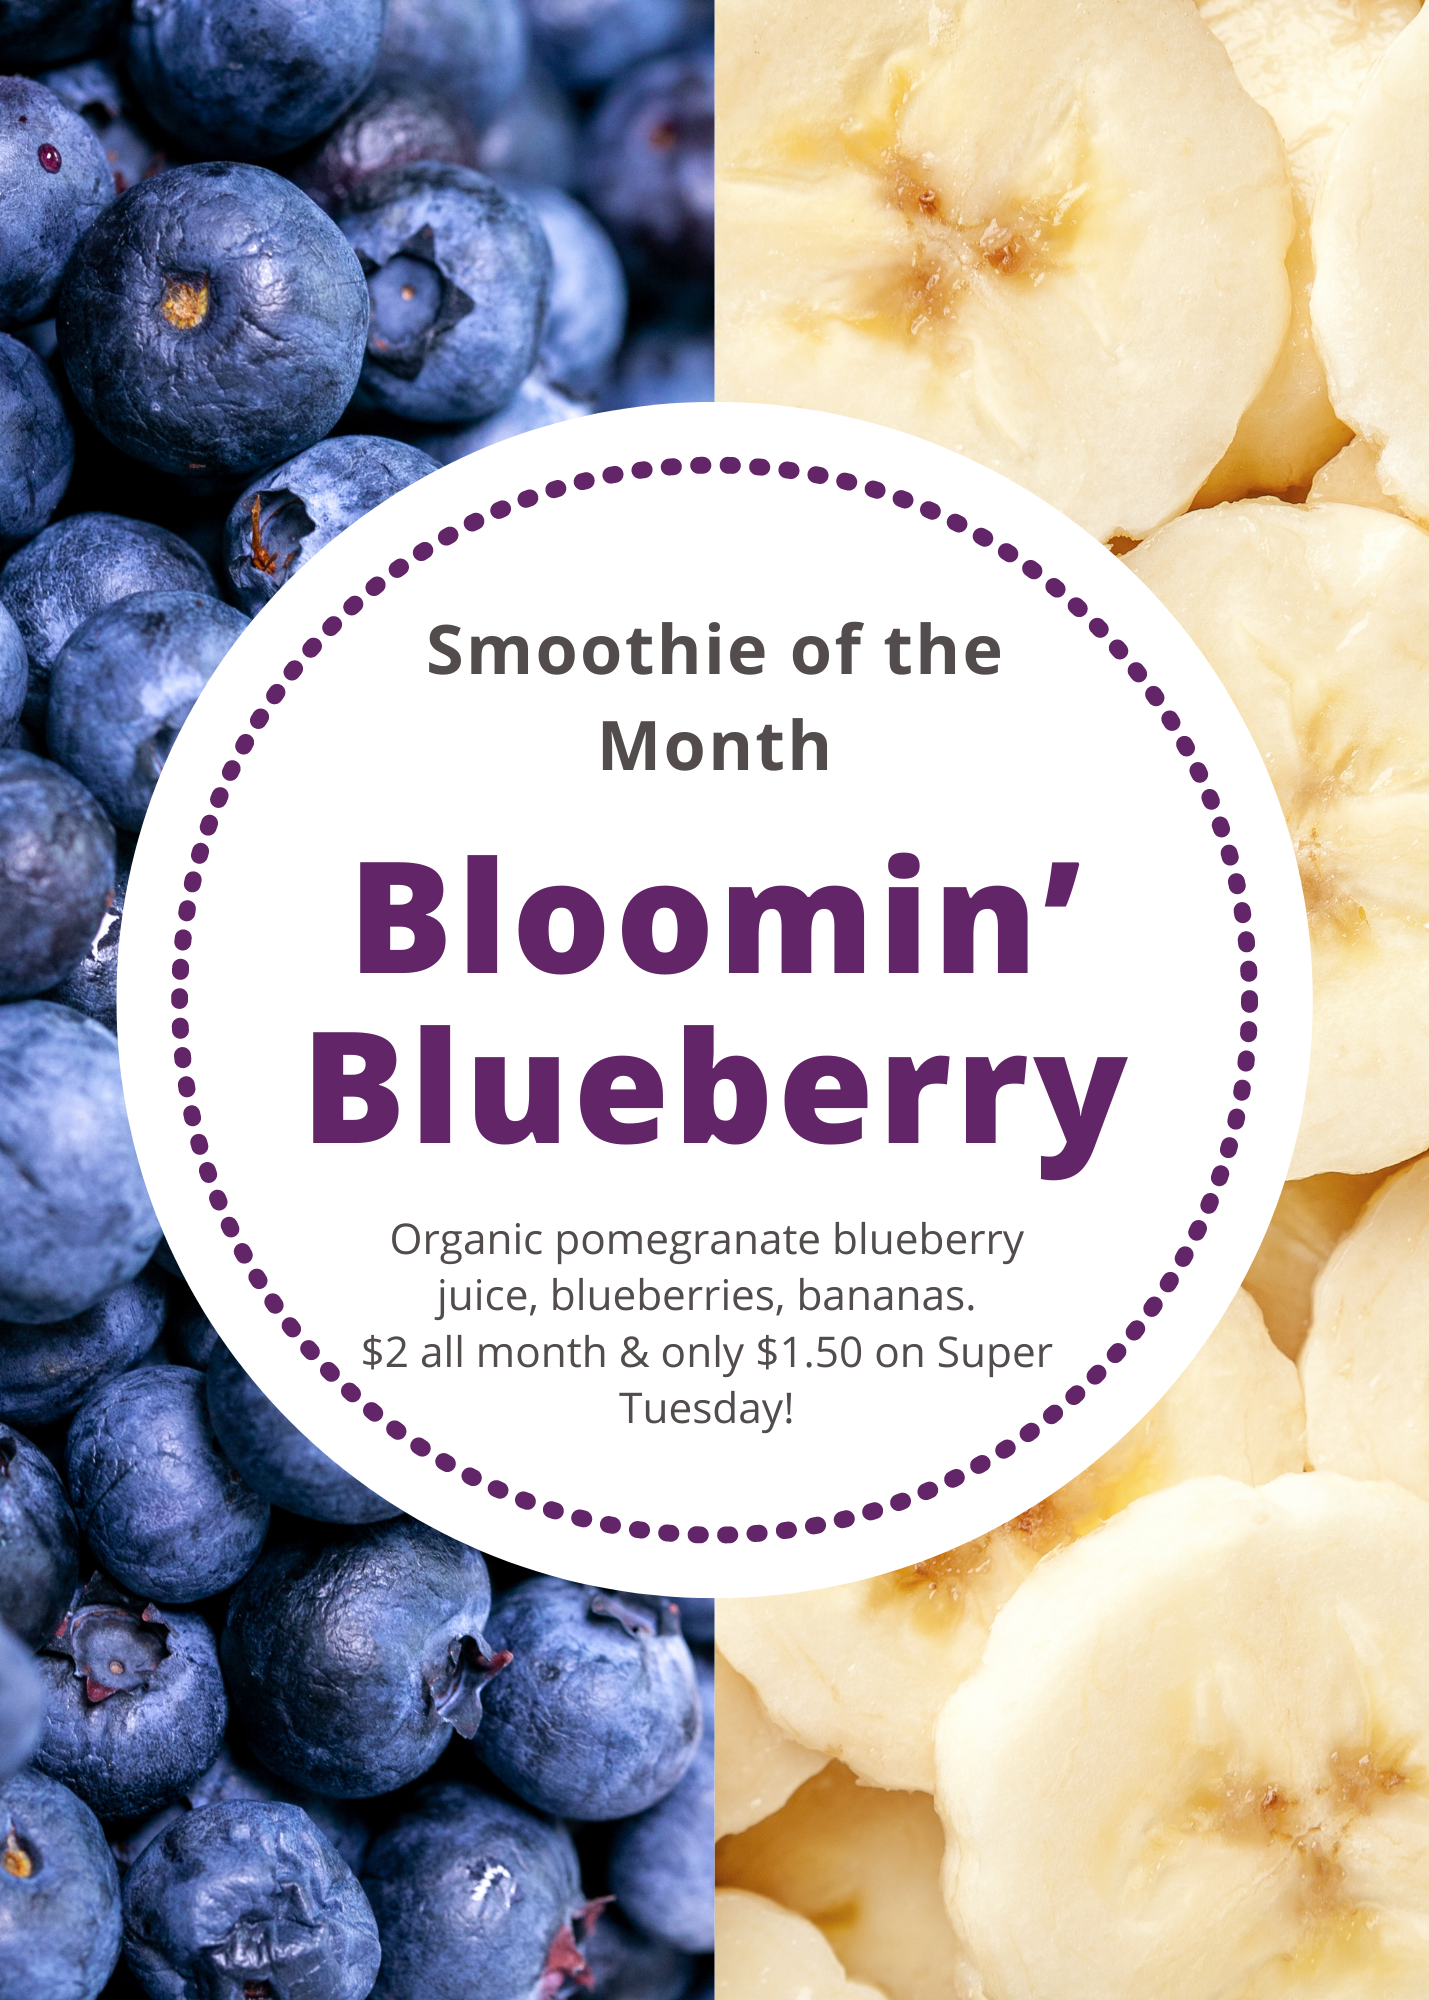 Bloomin' Blueberry Smoothie of the Month